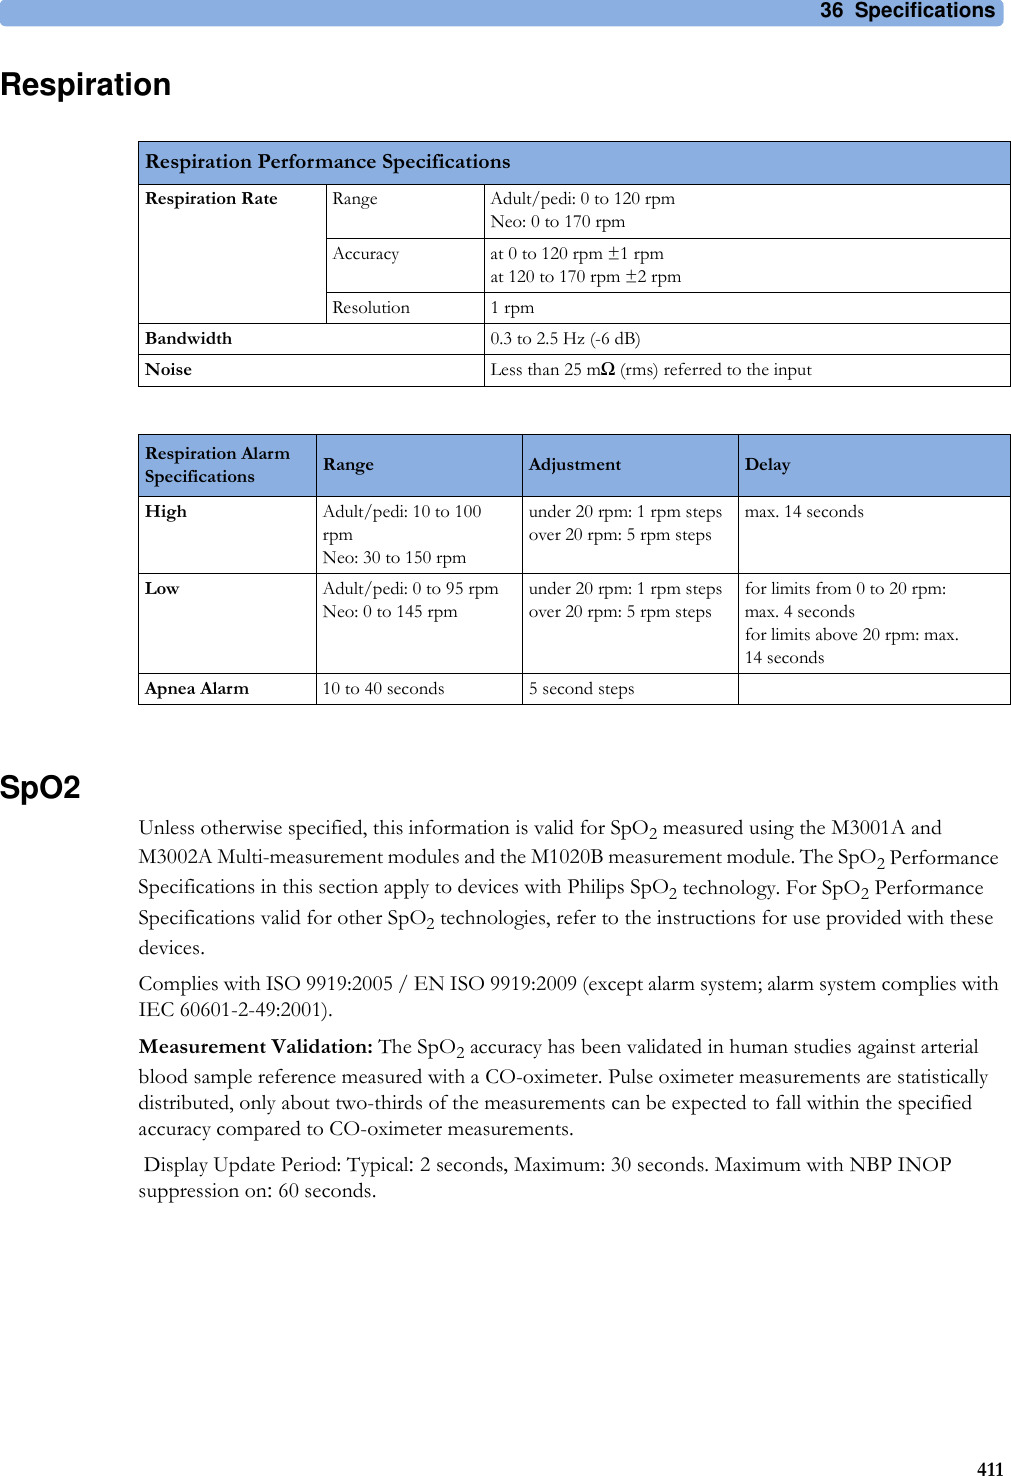 36 Specifications411RespirationSpO2Unless otherwise specified, this information is valid for SpO2 measured using the M3001A and M3002A Multi-measurement modules and the M1020B measurement module. The SpO2 Performance Specifications in this section apply to devices with Philips SpO2 technology. For SpO2 Performance Specifications valid for other SpO2 technologies, refer to the instructions for use provided with these devices.Complies with ISO 9919:2005 / EN ISO 9919:2009 (except alarm system; alarm system complies with IEC 60601-2-49:2001).Measurement Validation: The SpO2 accuracy has been validated in human studies against arterial blood sample reference measured with a CO-oximeter. Pulse oximeter measurements are statistically distributed, only about two-thirds of the measurements can be expected to fall within the specified accuracy compared to CO-oximeter measurements. Display Update Period: Typical: 2 seconds, Maximum: 30 seconds. Maximum with NBP INOP suppression on: 60 seconds.Respiration Performance SpecificationsRespiration Rate Range Adult/pedi: 0 to 120 rpmNeo: 0 to 170 rpmAccuracy at 0 to 120 rpm ±1 rpmat 120 to 170 rpm ±2 rpmResolution 1 rpmBandwidth 0.3 to 2.5 Hz (-6 dB)Noise Less than 25 mΩ (rms) referred to the inputRespiration Alarm Specifications Range Adjustment DelayHigh Adult/pedi: 10 to 100  rpmNeo: 30 to 150 rpmunder 20 rpm: 1 rpm stepsover 20 rpm: 5 rpm stepsmax. 14 secondsLow Adult/pedi: 0 to 95 rpmNeo: 0 to 145 rpmunder 20 rpm: 1 rpm stepsover 20 rpm: 5 rpm stepsfor limits from 0 to 20 rpm: max. 4 secondsfor limits above 20 rpm: max. 14 secondsApnea Alarm 10 to 40 seconds 5 second steps